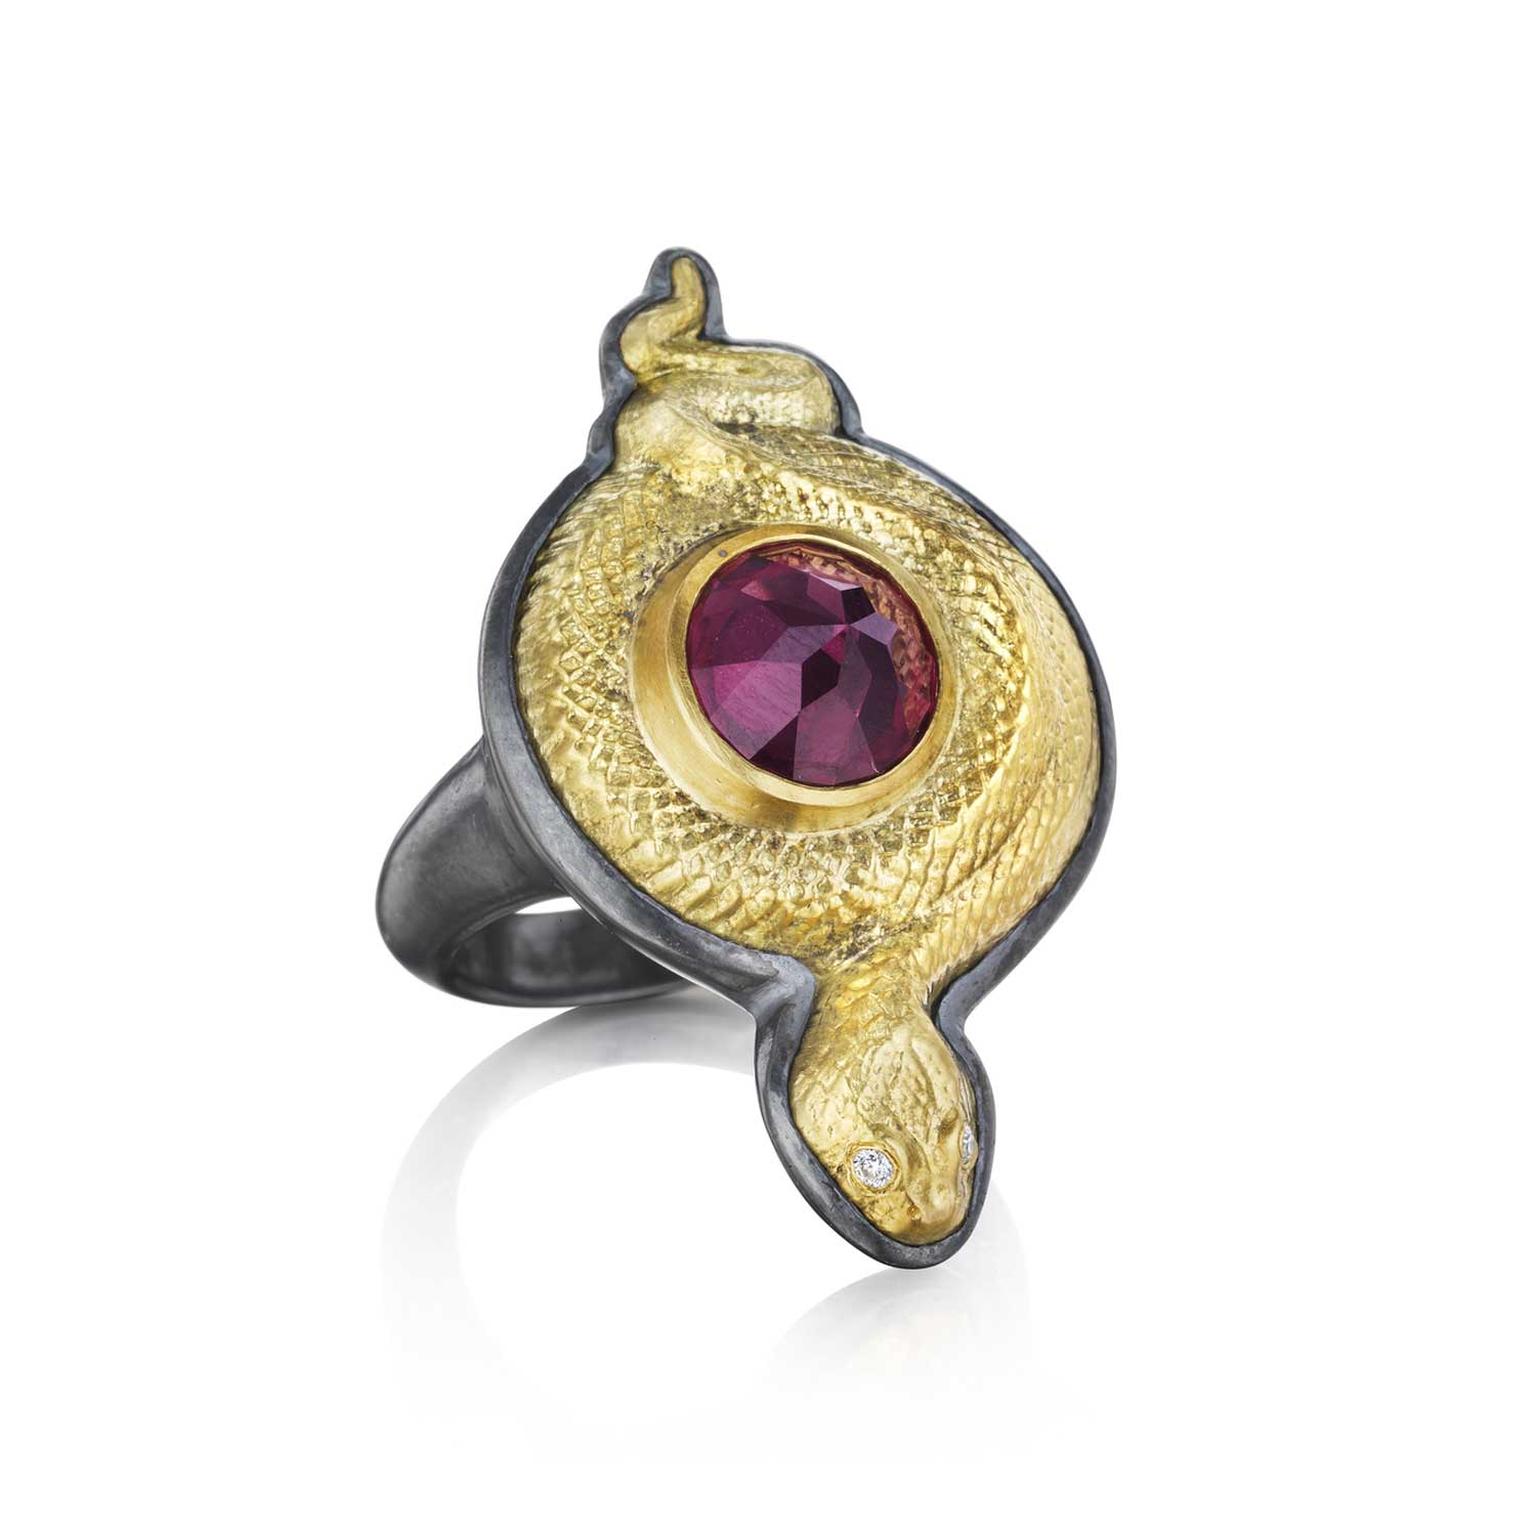 All you need to know about rhodolite garnets, January's birthstone